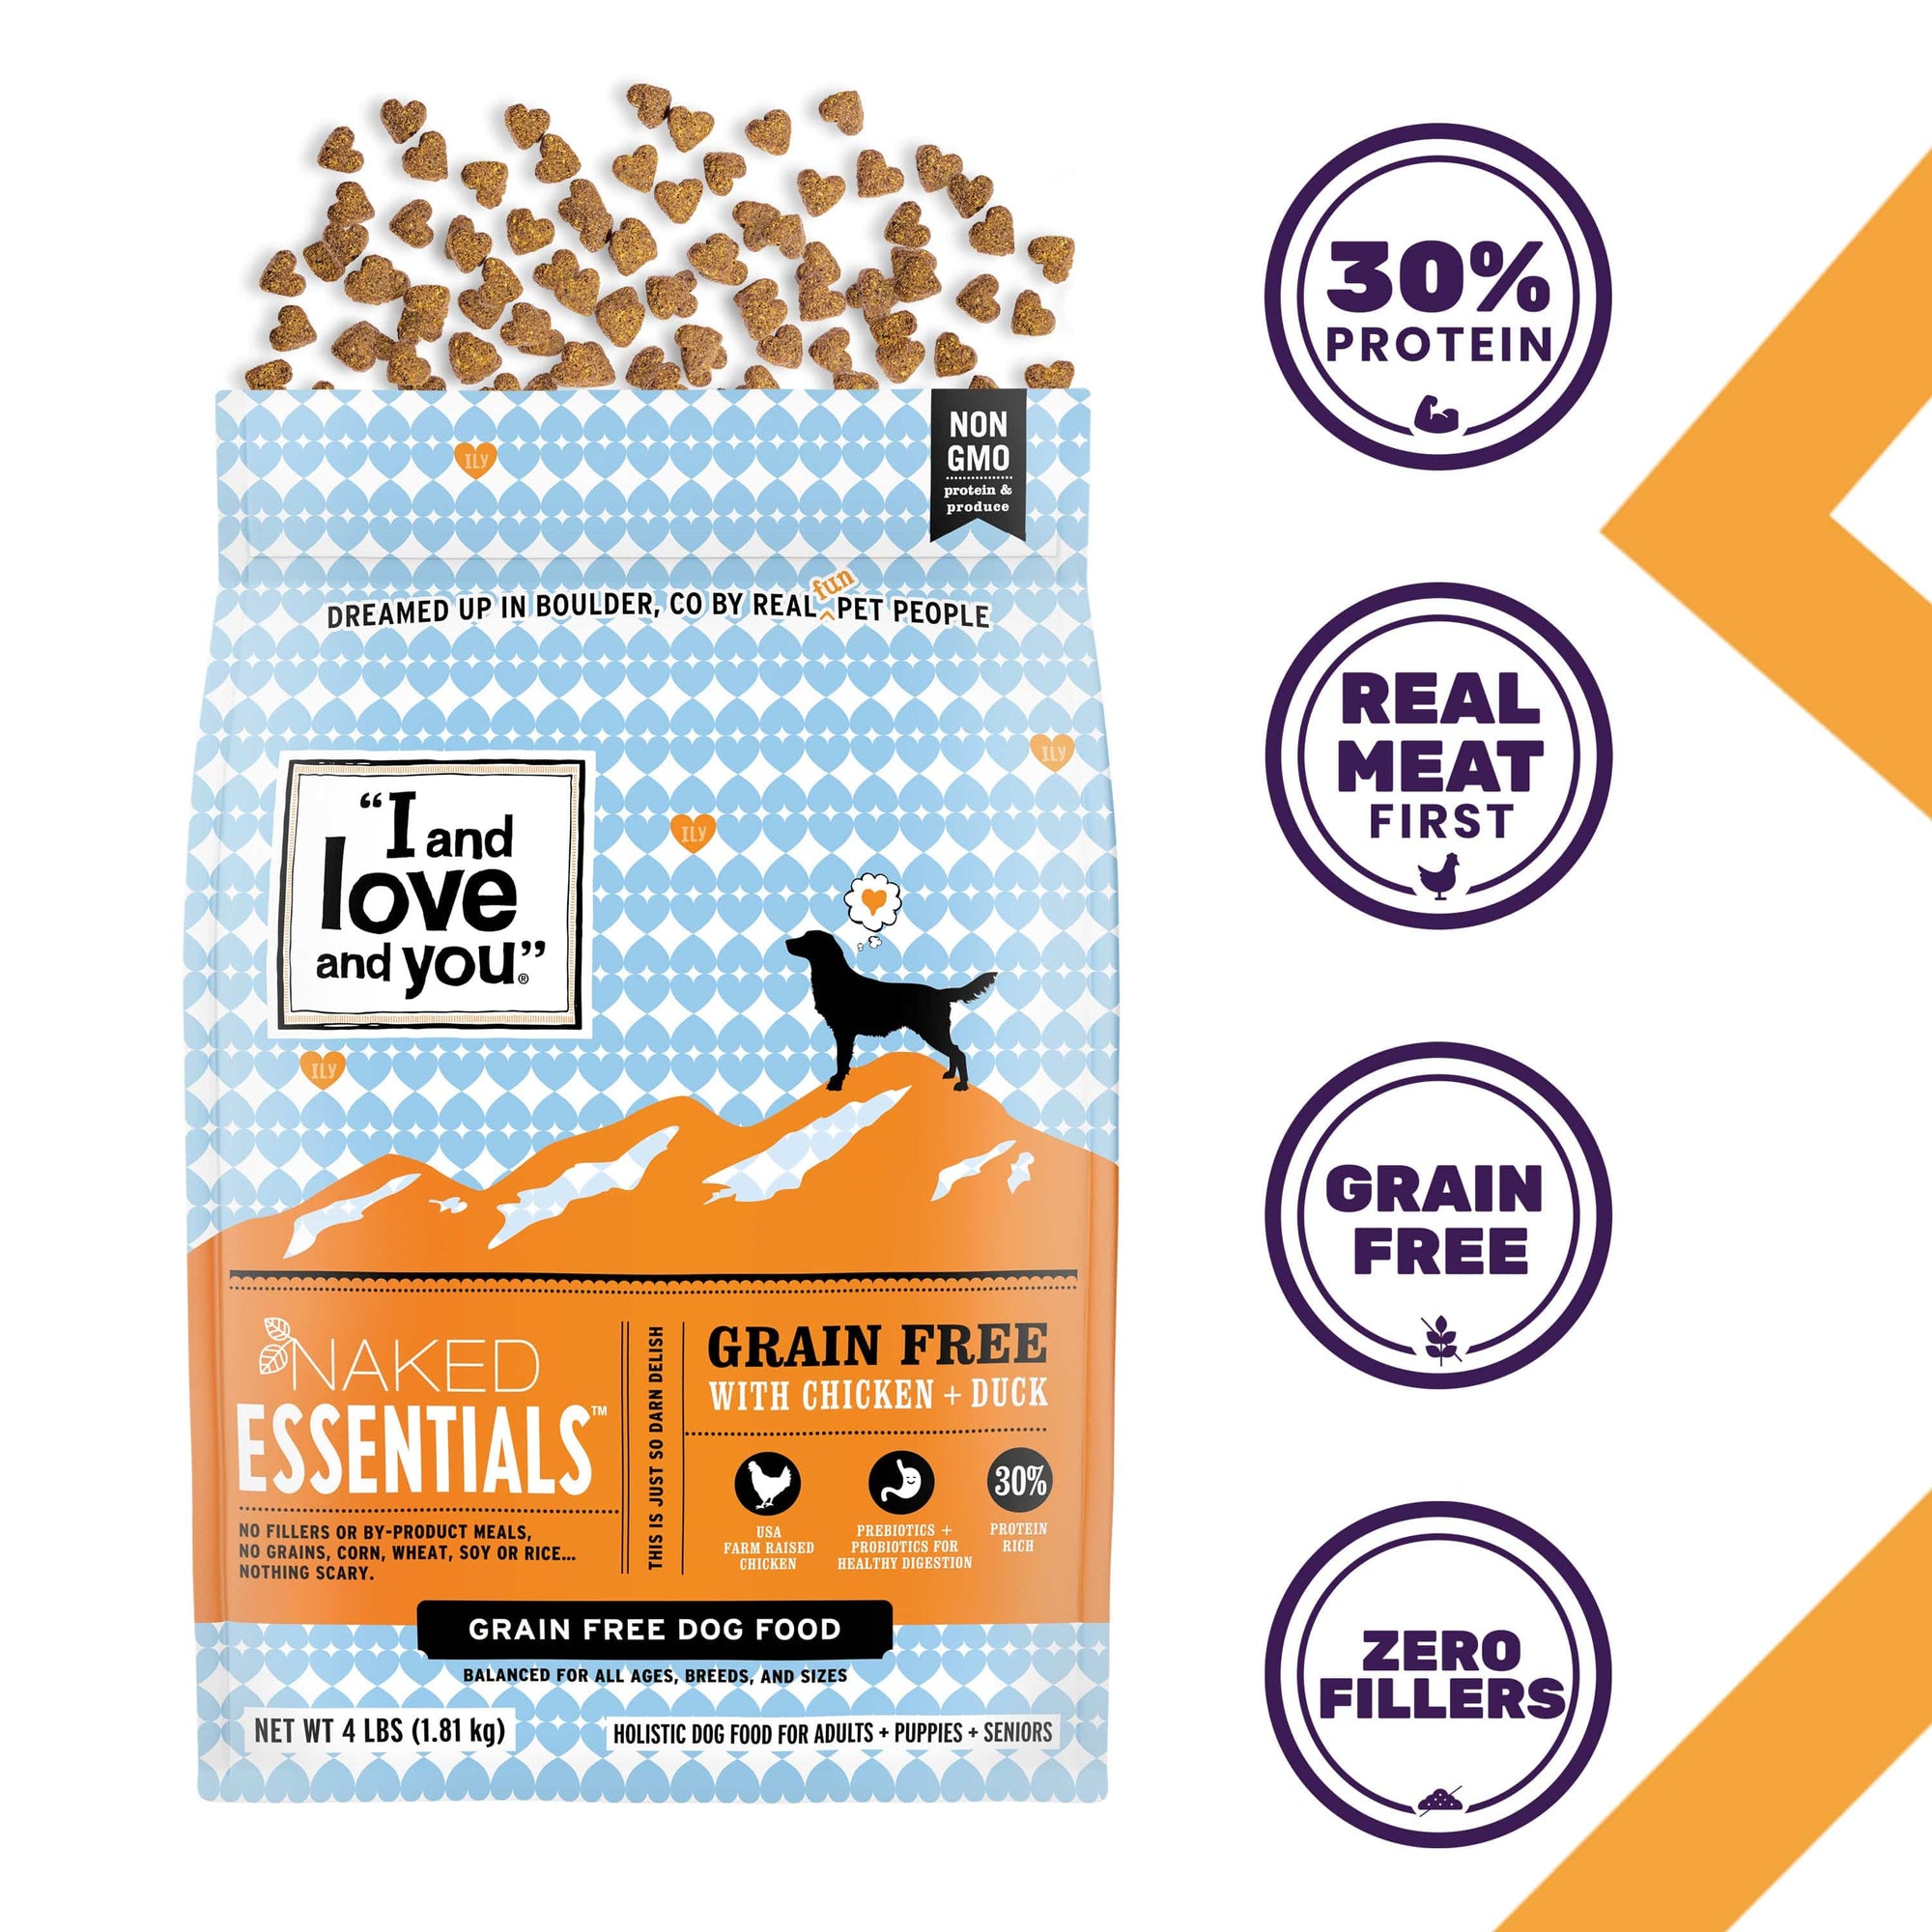 A bag of dog food featuring Naked Essentials - Chicken + Duck kibble for your pet's health and happiness.